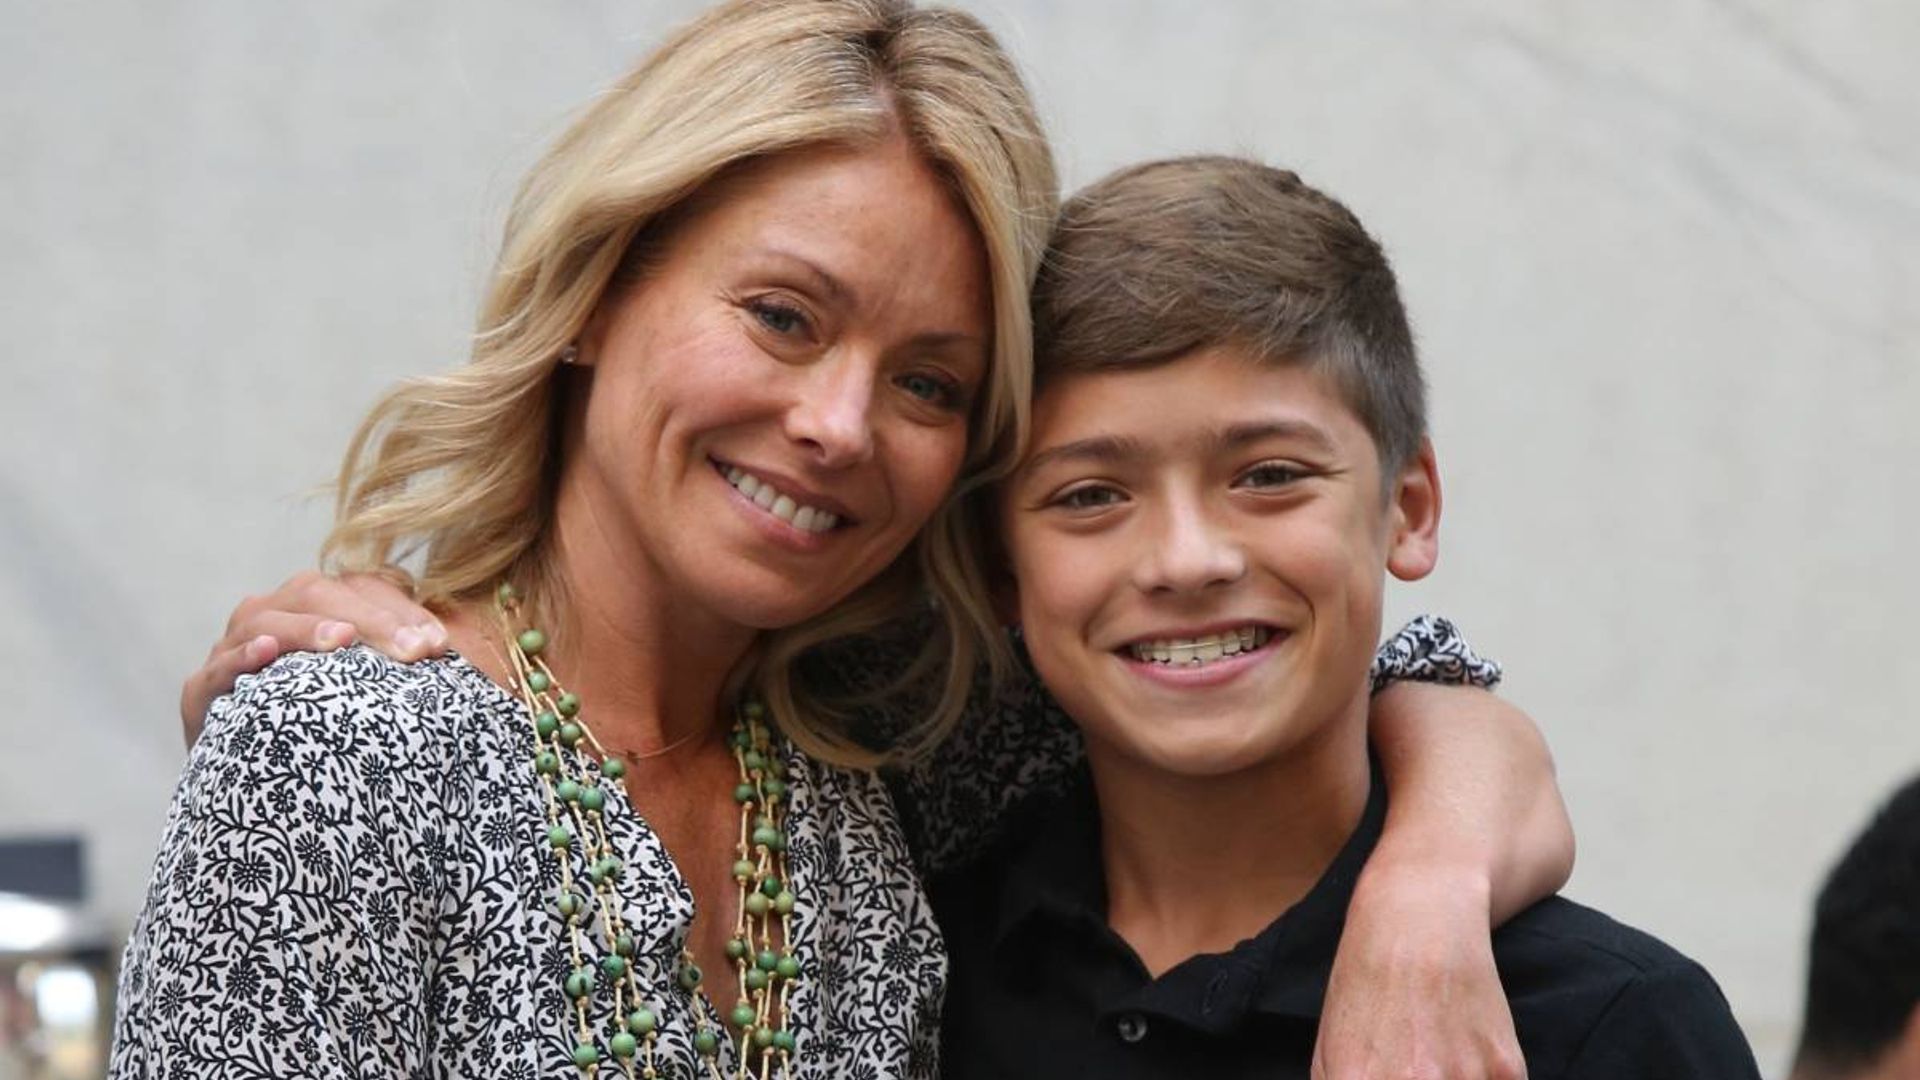 Kelly Ripa's son Joaquin made a brave decision that broke family tradition